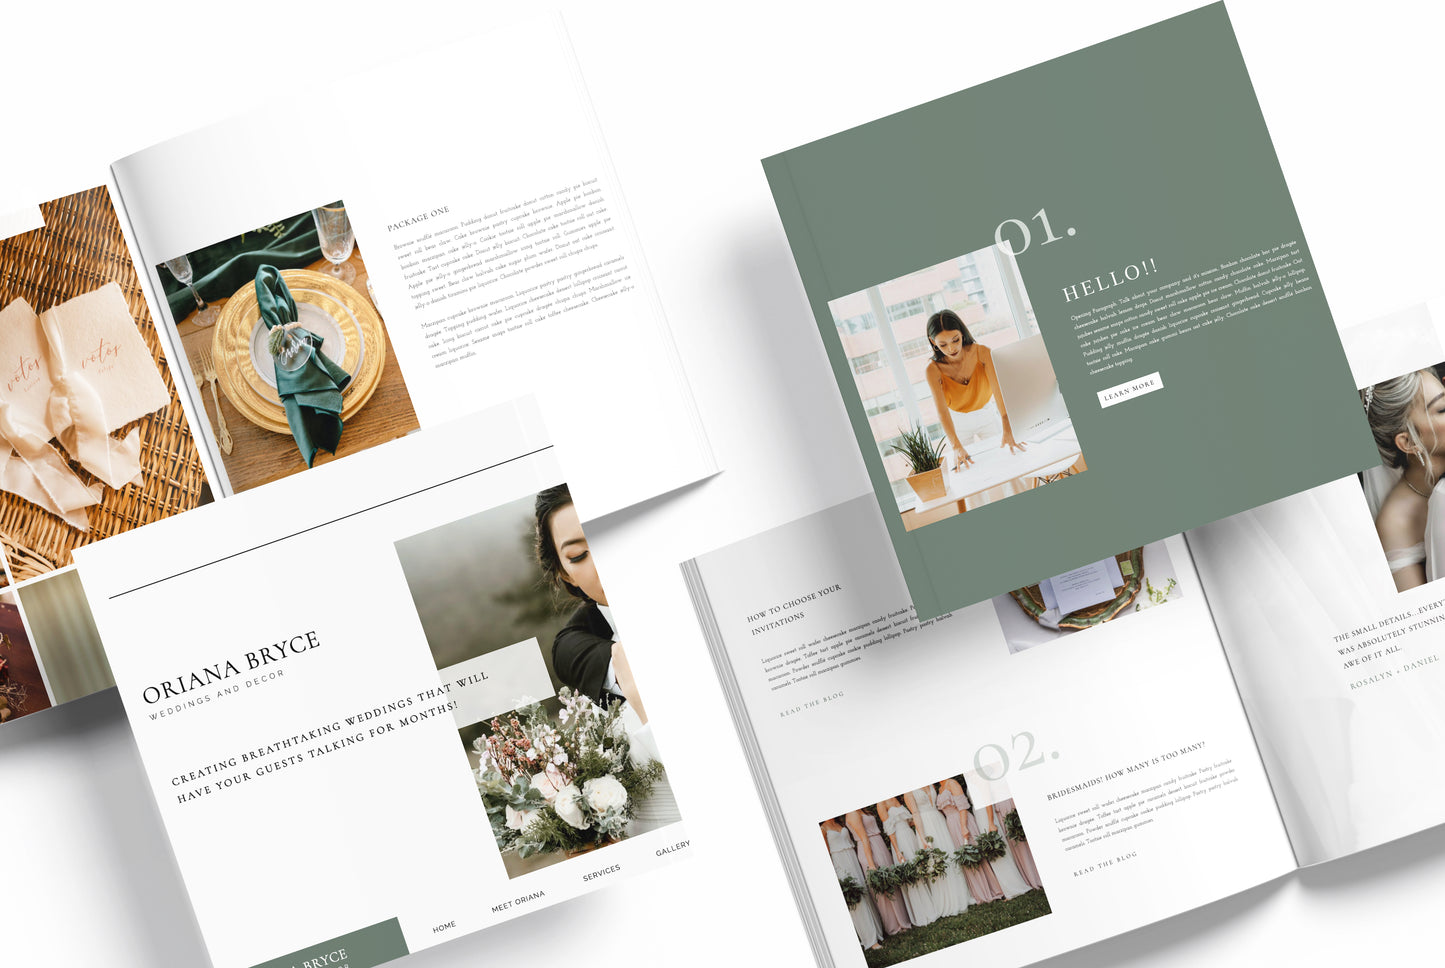 The "Oriana Bryce" Showit Template by Taaenoelle + Co.